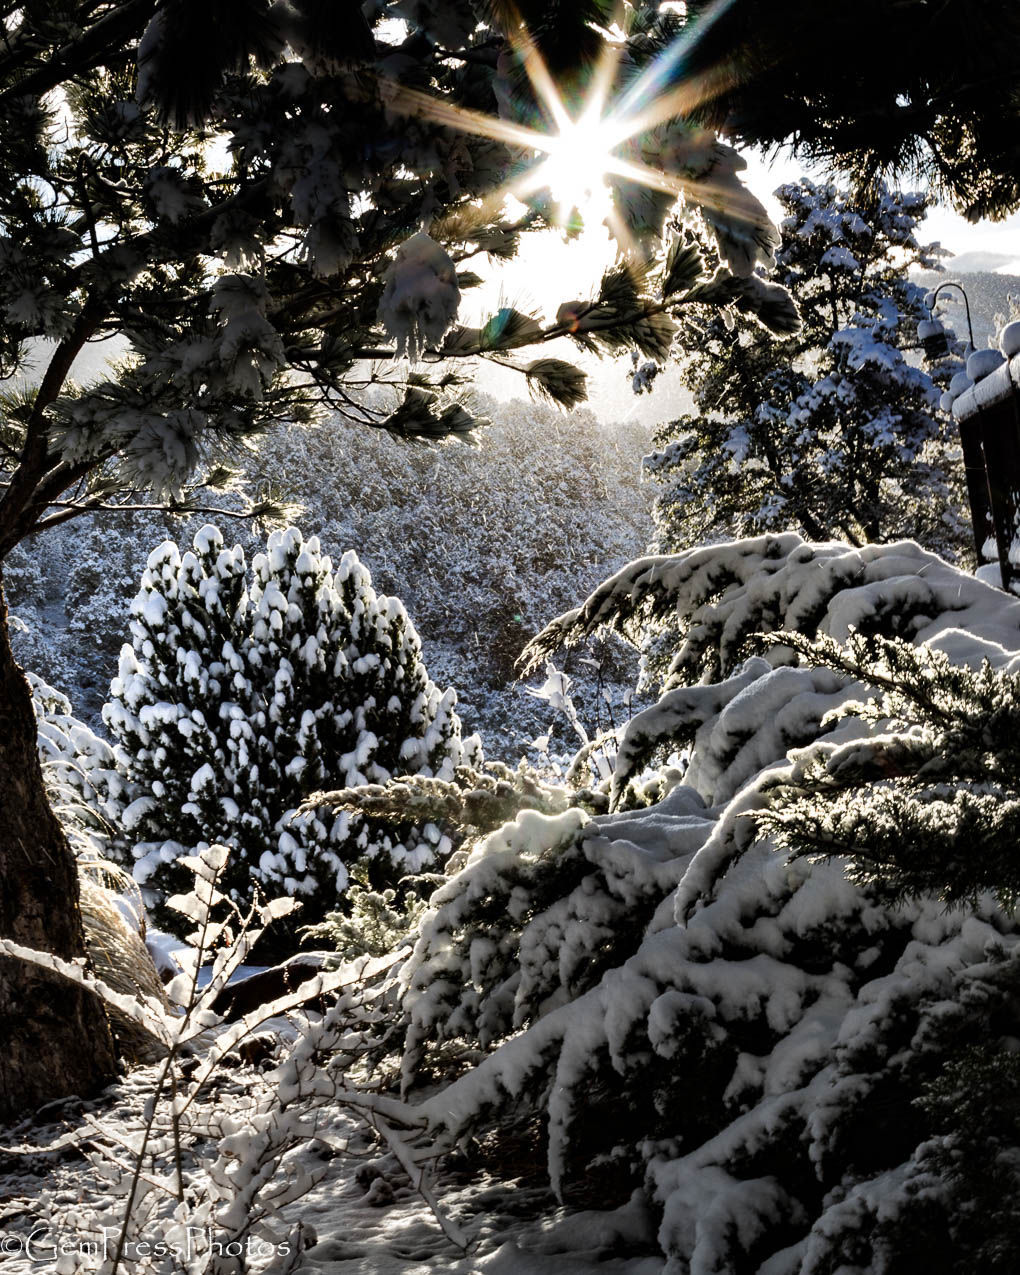 Forecast calls for snow in Payson on Sunday | News ...